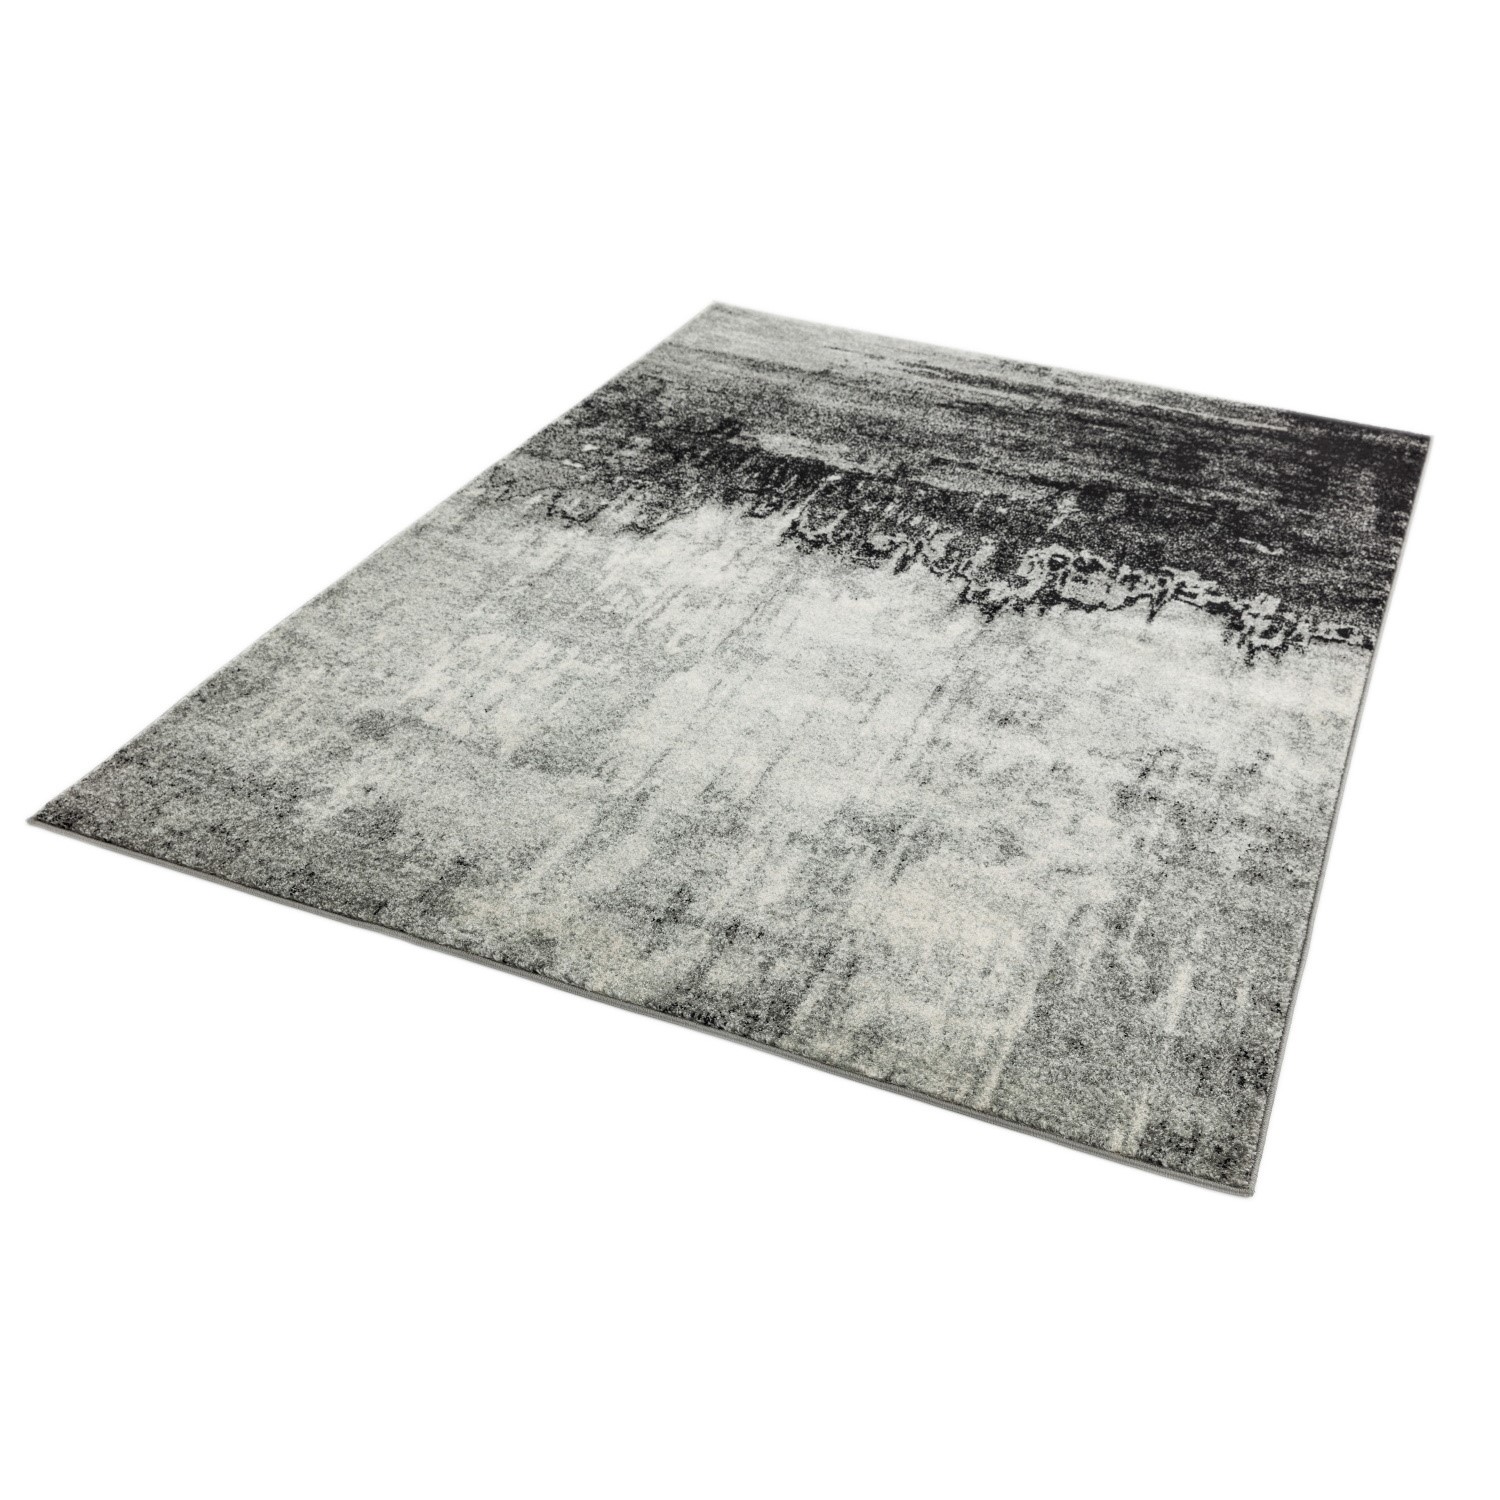 Read more about Large grey rug 120x170cm nova